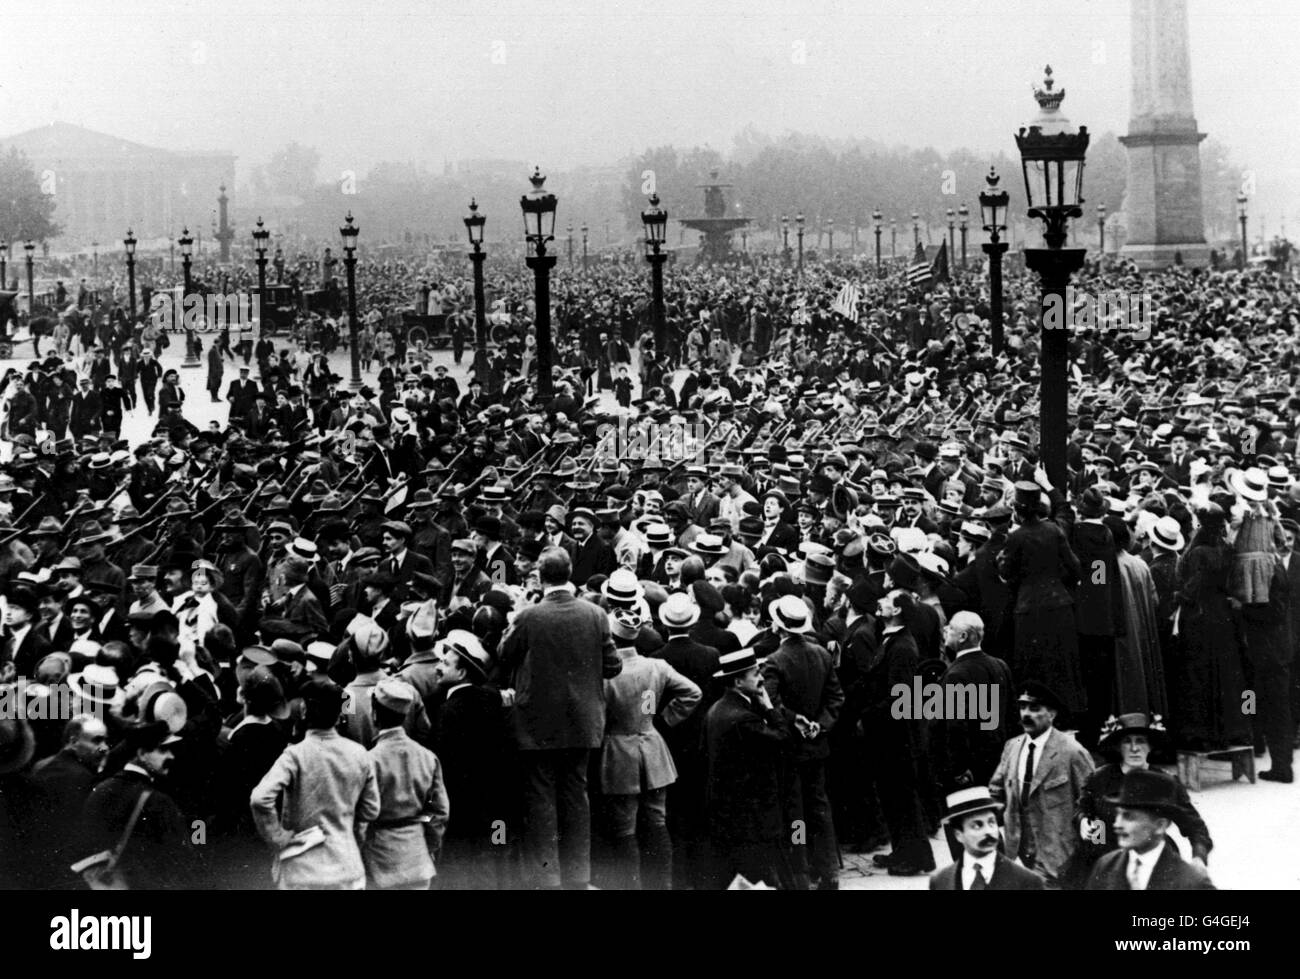 04/09/1917 - ON THIS DAY IN 1917 - American troops in France suffer their first casualty in World War One 6th APRIL: The USA declares war on Germany and enters World War I . PA NEWS PHOTO 4/7/1917 INDEPENDENCE DAY IN PARIS: THE AMERICAN TROOPS MARCHING THROUGH THE PLACE DE LA CONCORDE TO LES INVALIDES DURING THE FIRST WORLD WAR. 1917. Stock Photo